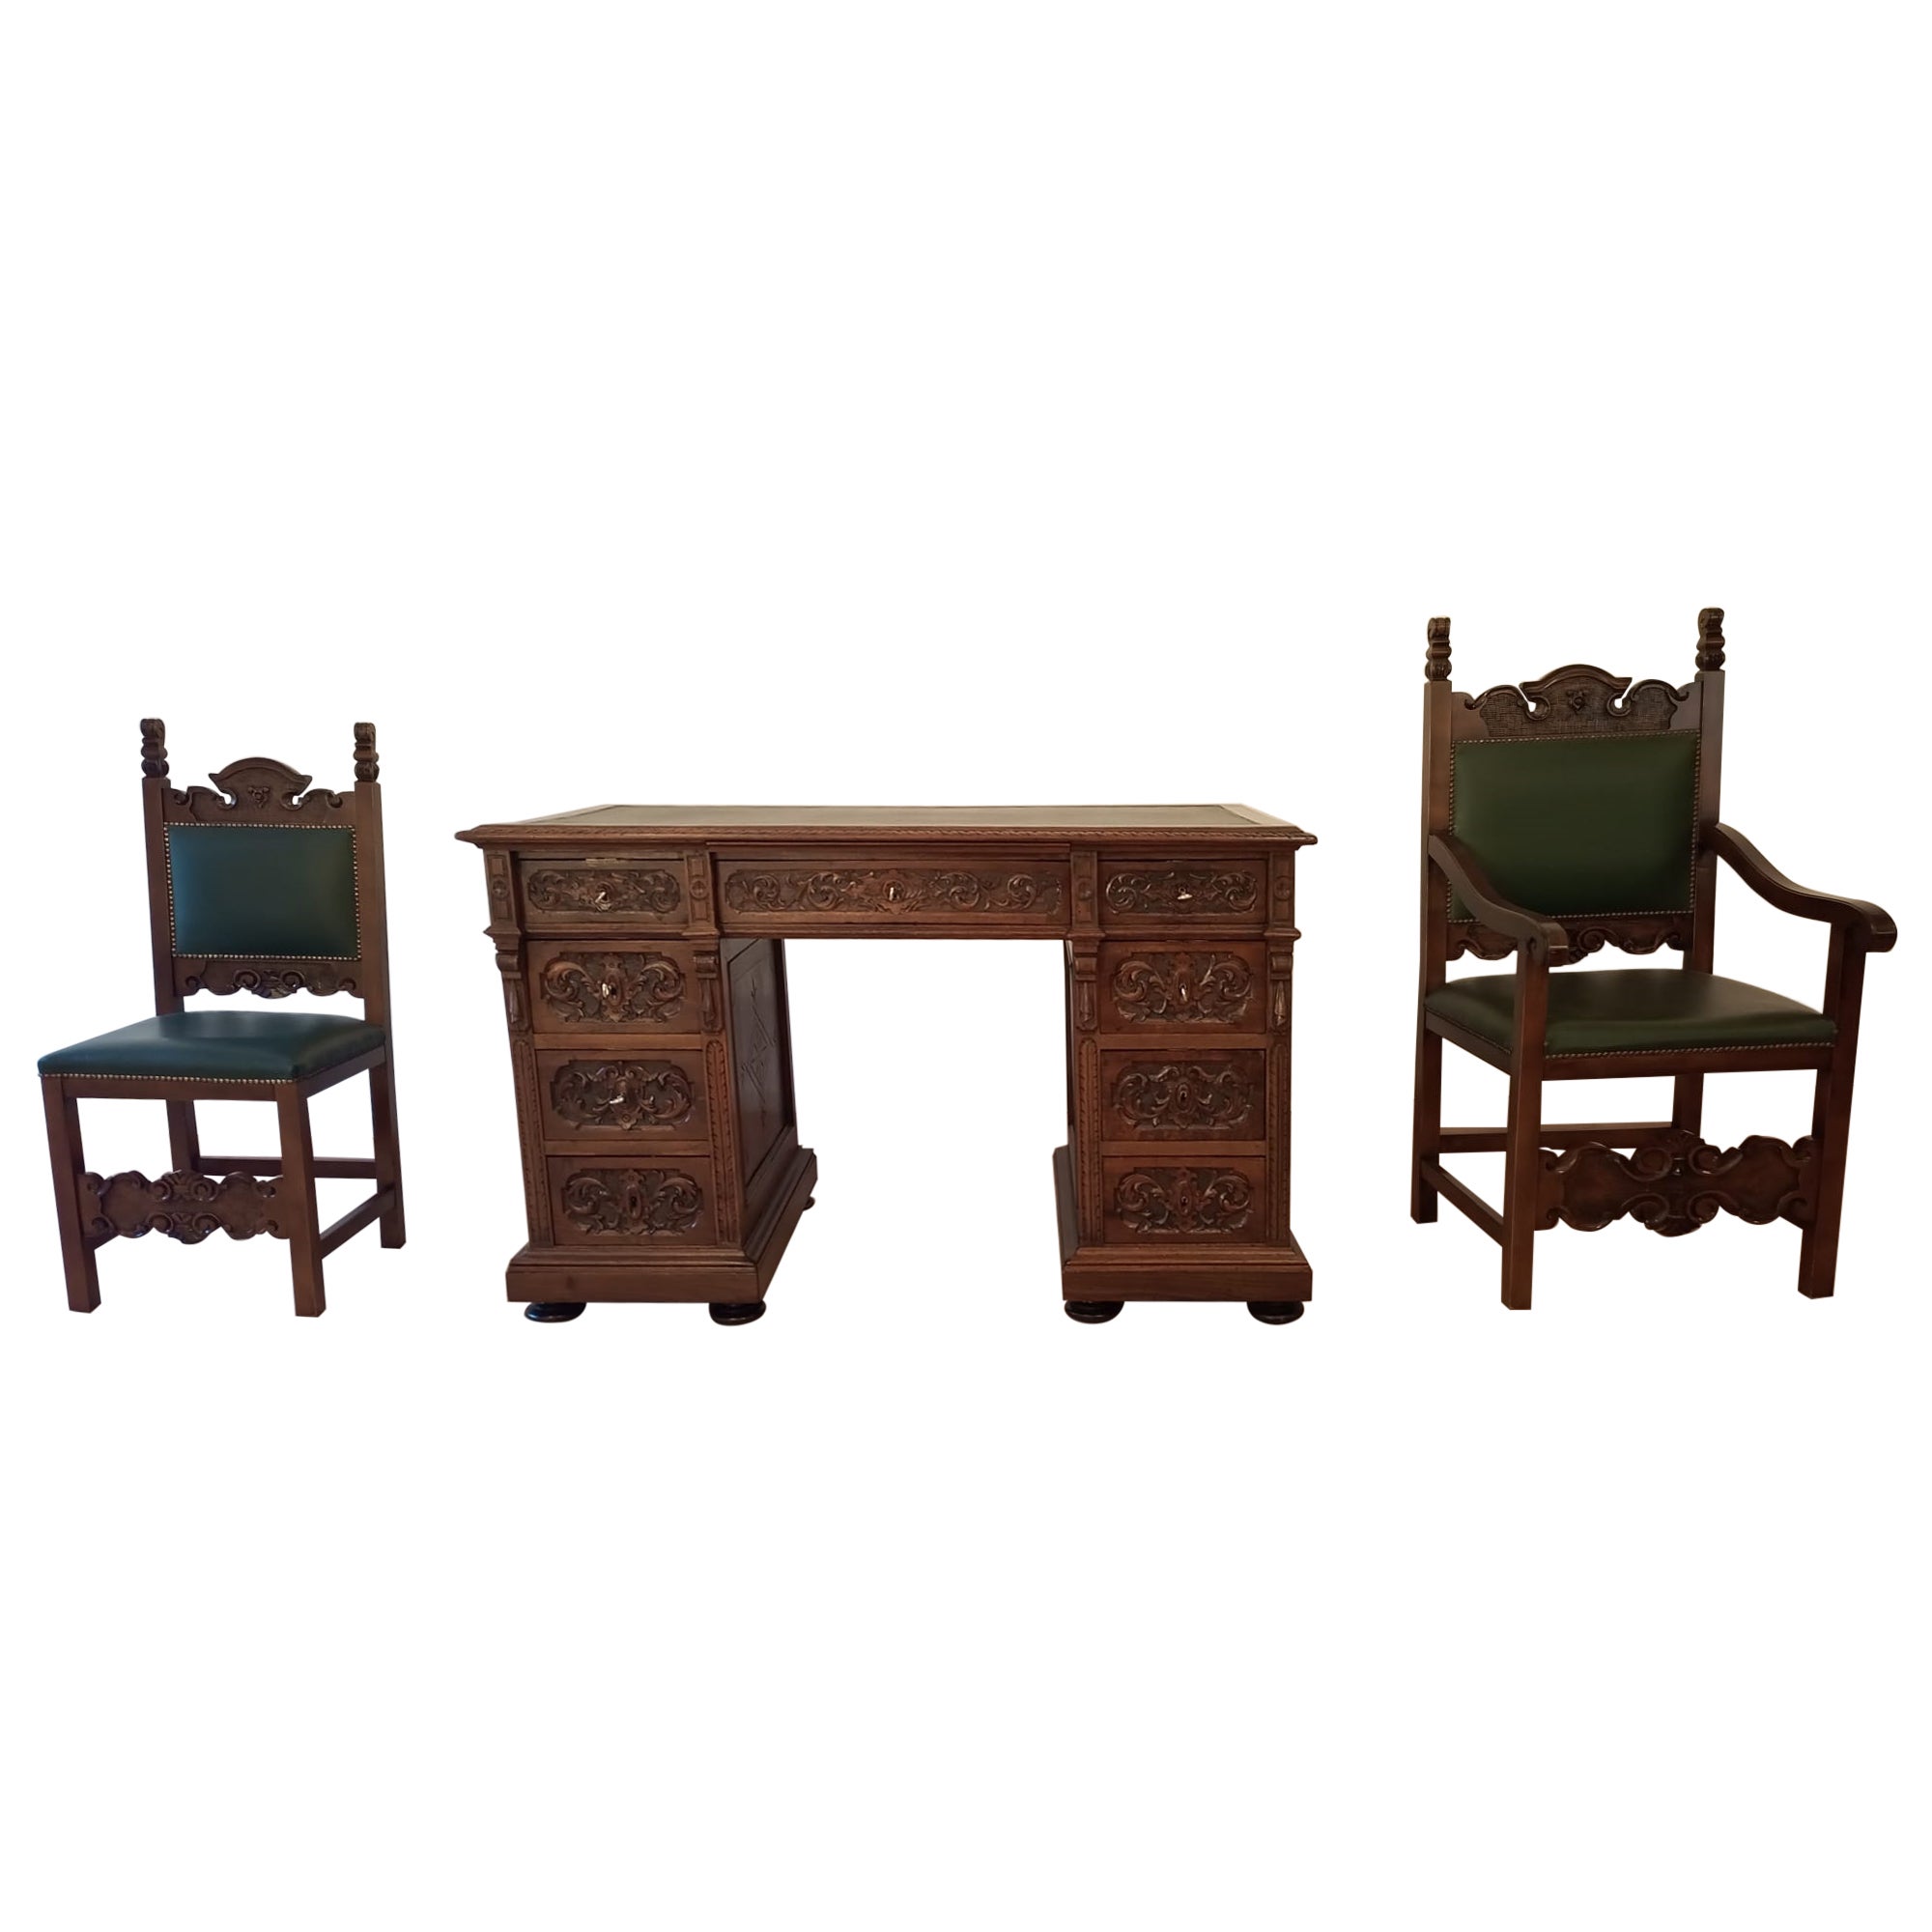 Antique Victorian Table And Chairs - 4 For Sale on 1stDibs